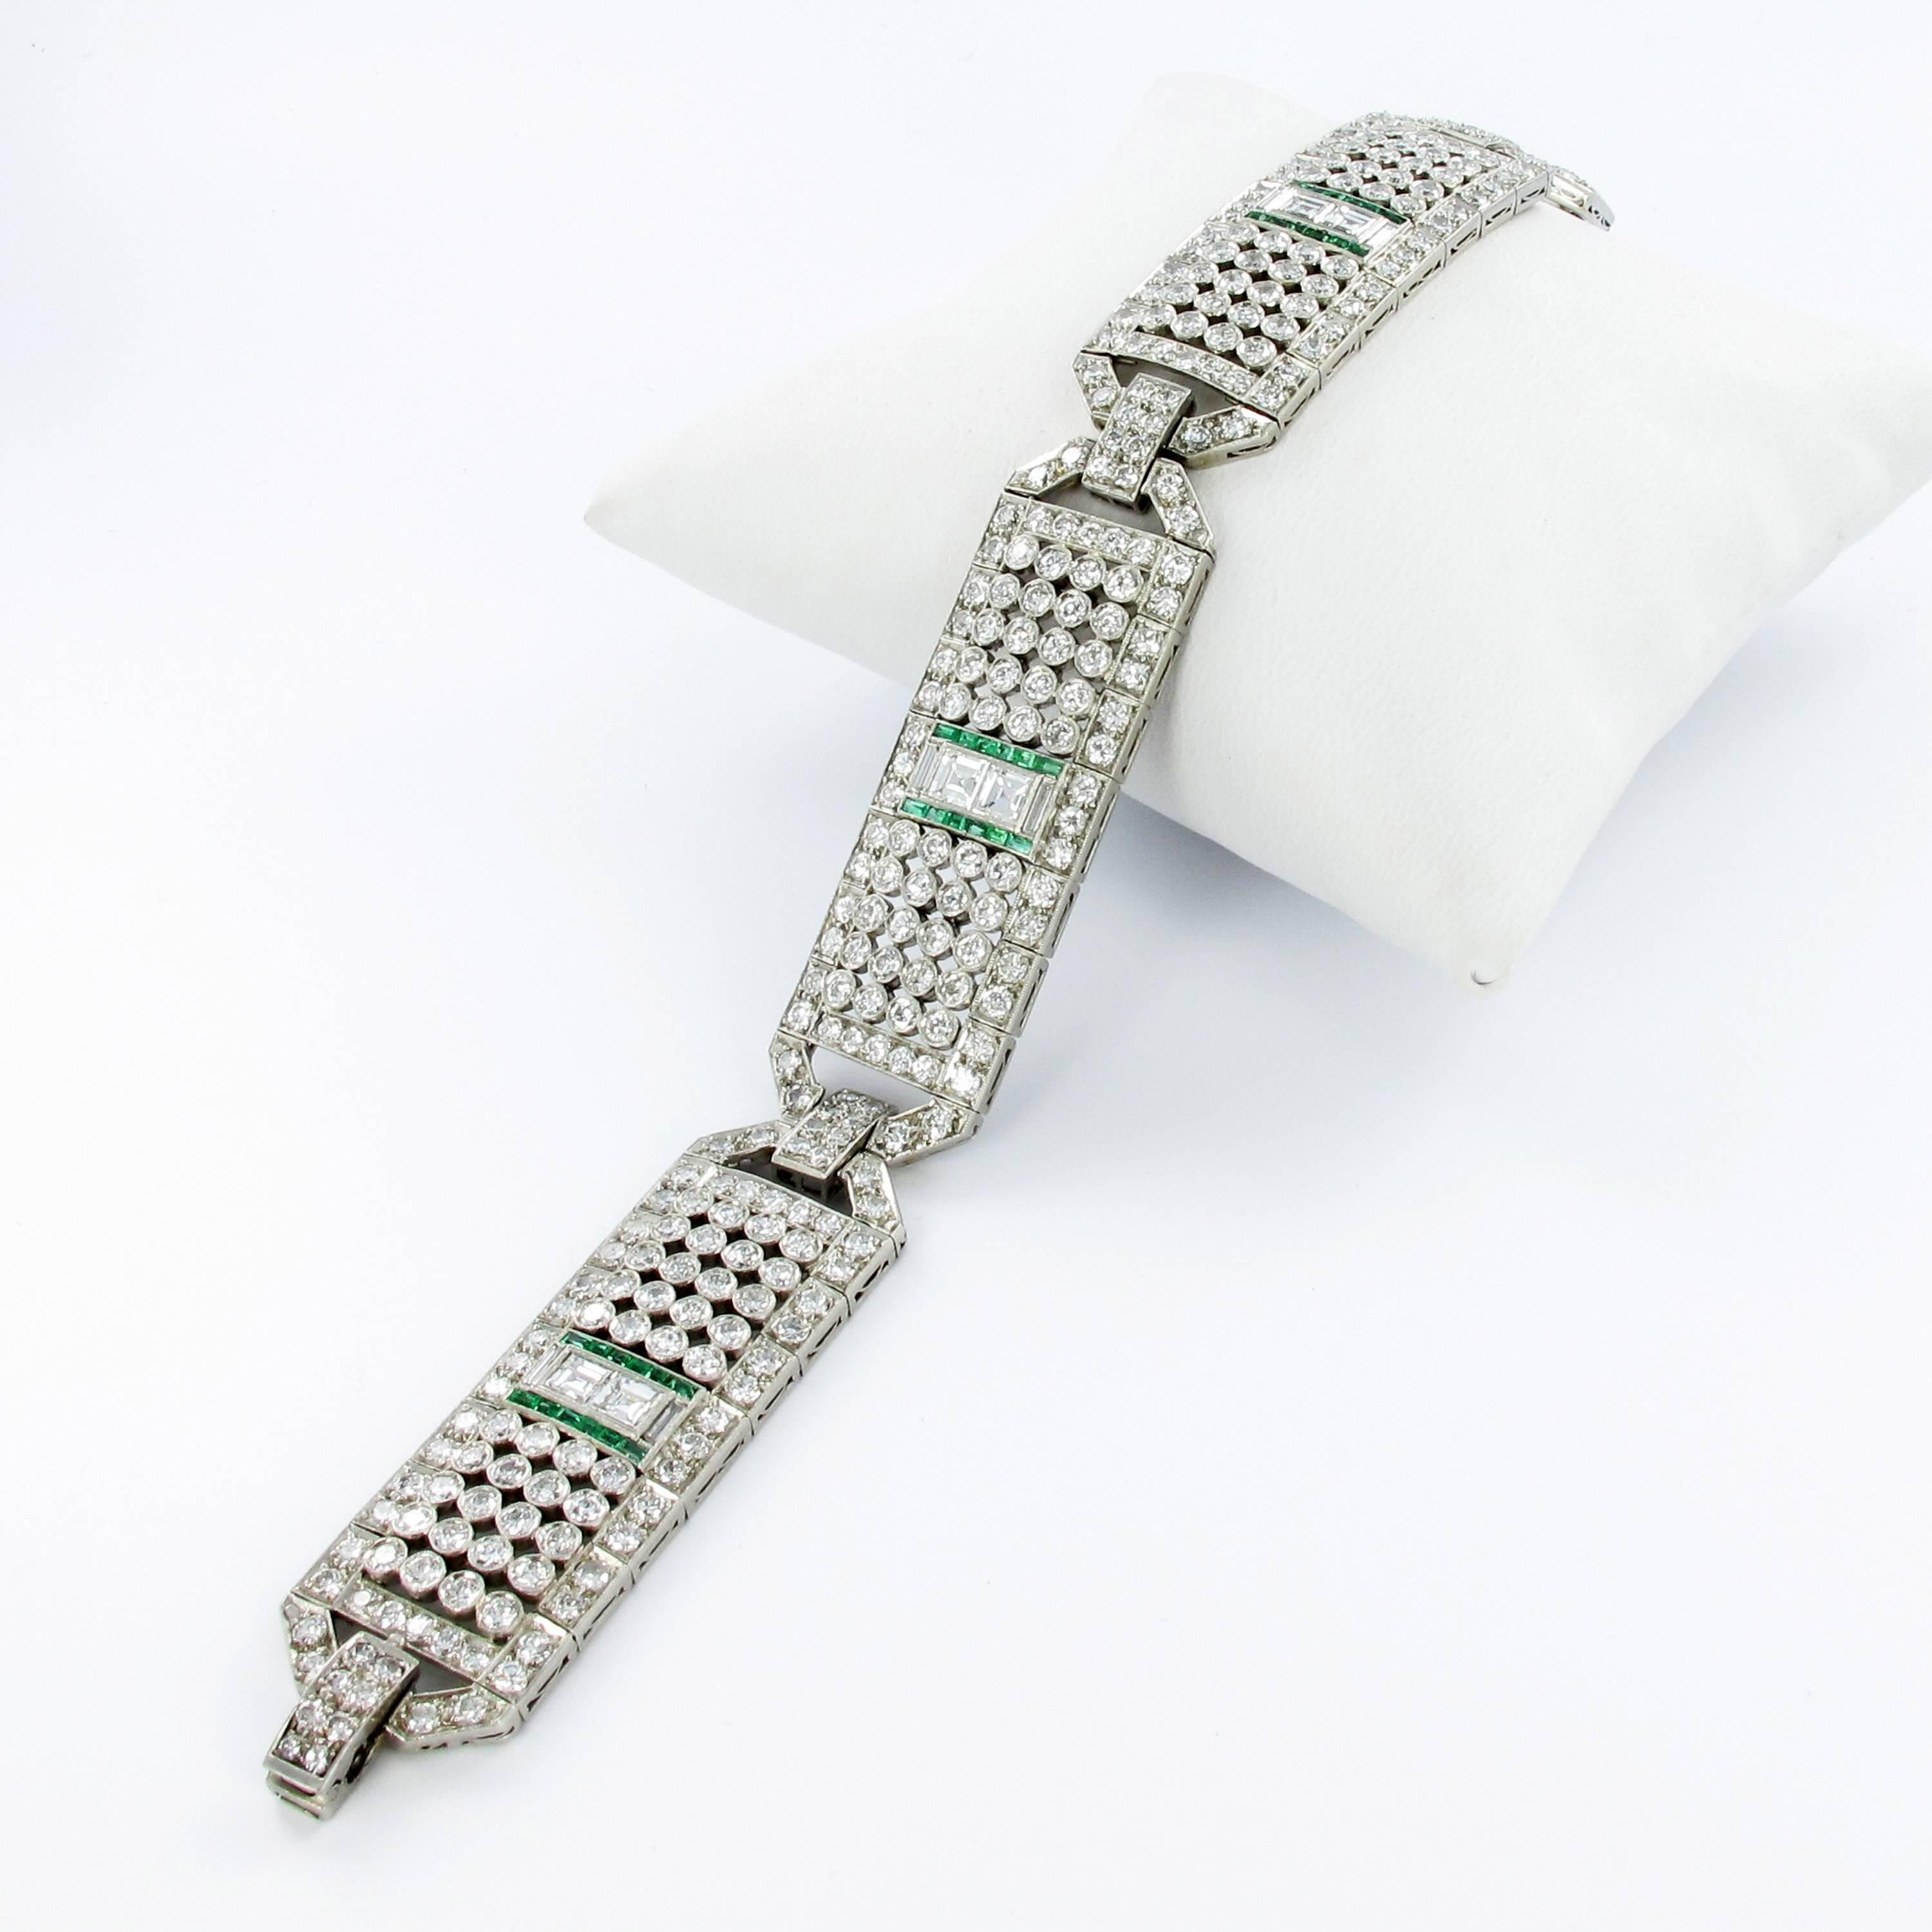 This original magnificent Art Deco bracelet is handcrafted in platinum 950. The 310 round-cut, 6 square-cut and 6 baguette-cut diamonds are weighing approx. 16 carats in total. The quality of diamonds is stated as G/H color and VS clarity (very few